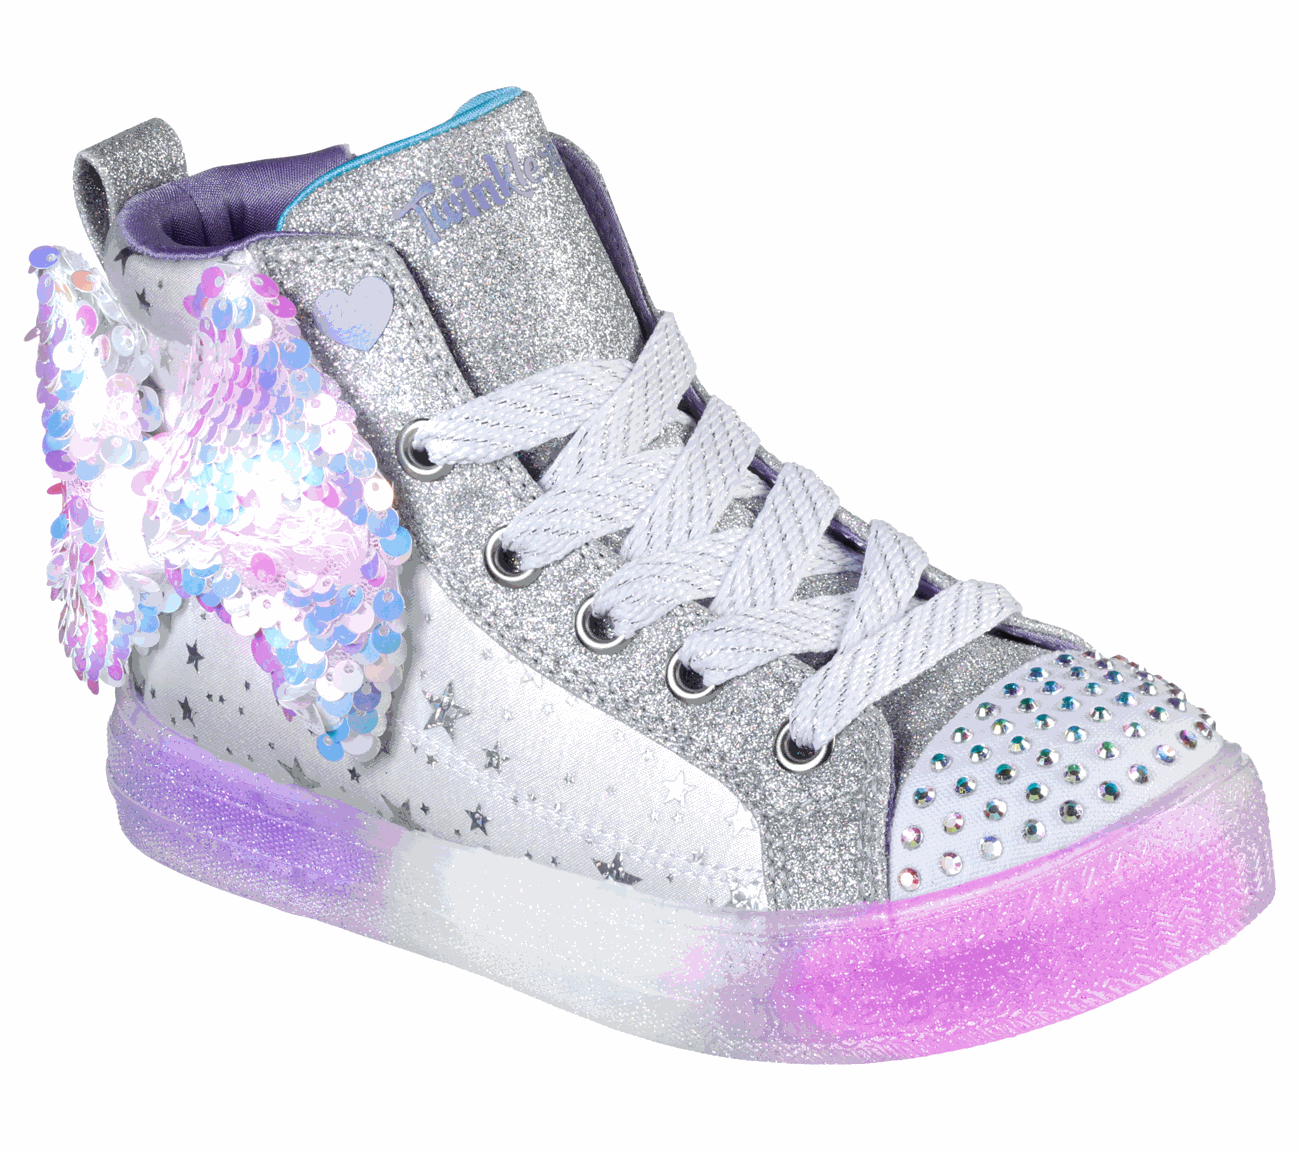 twinkle toes tennis shoes outlet store 